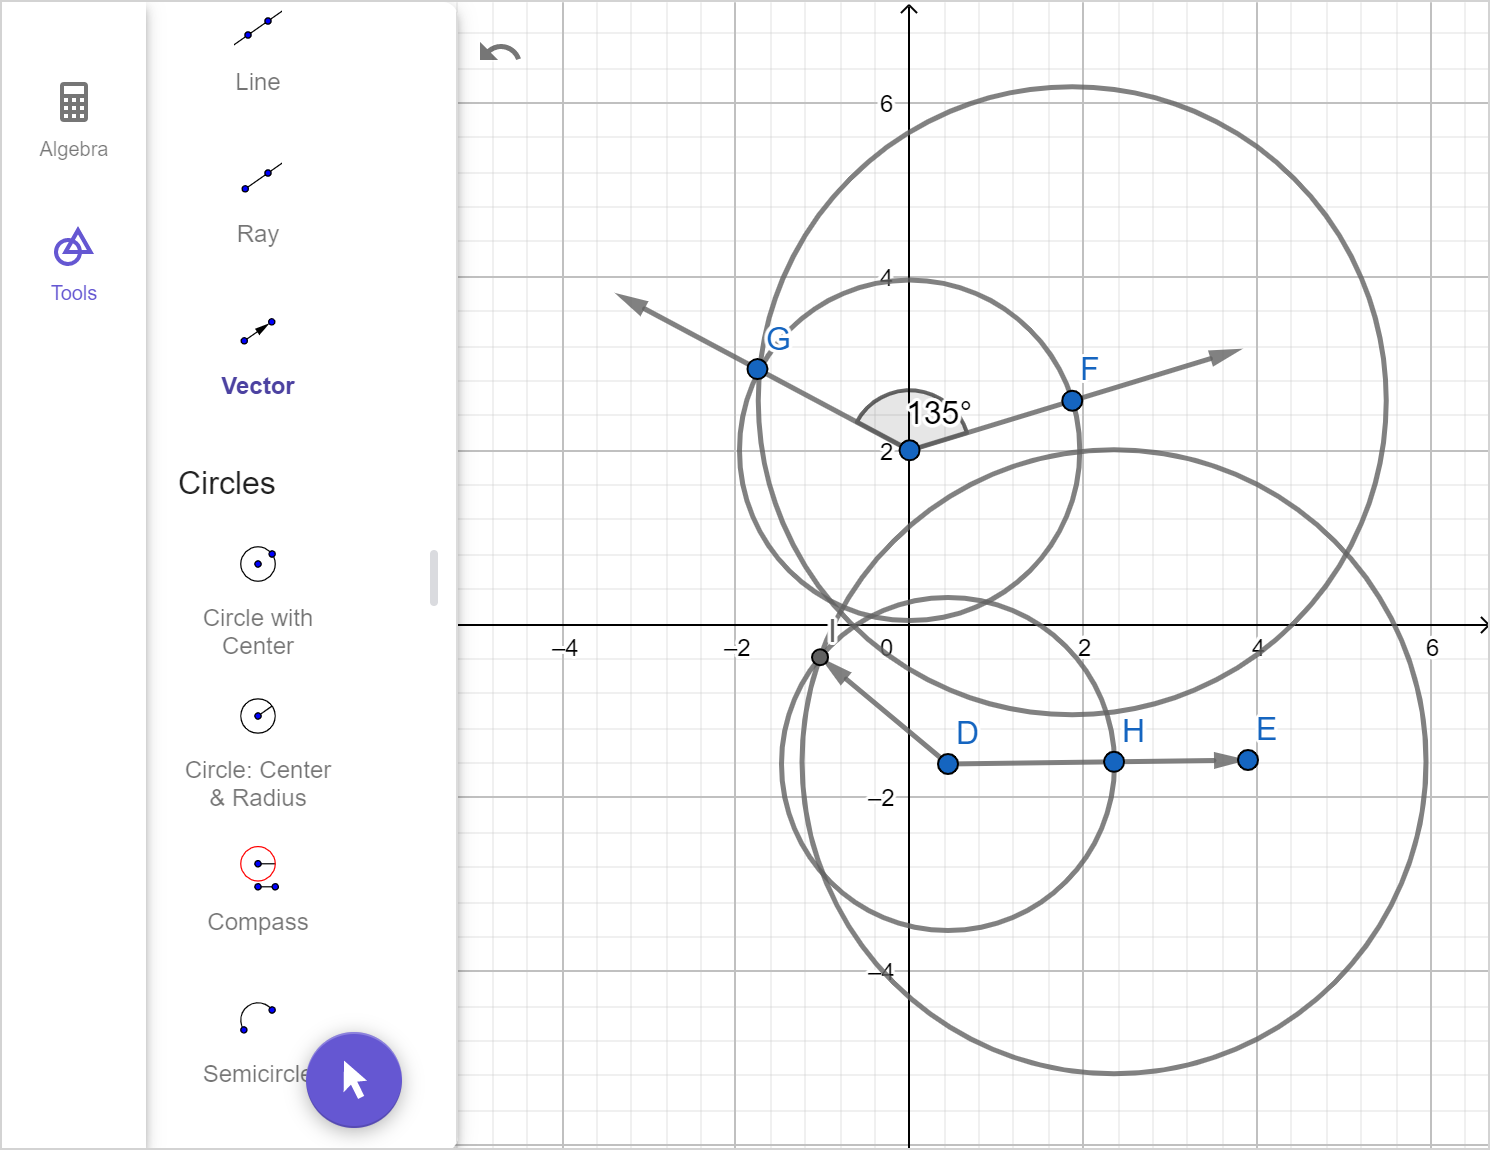 A screenshot of the GeoGebra geometry tool showing the previous image with a new segment joining point D and a new point of intersection. Speak to your teacher for more details.